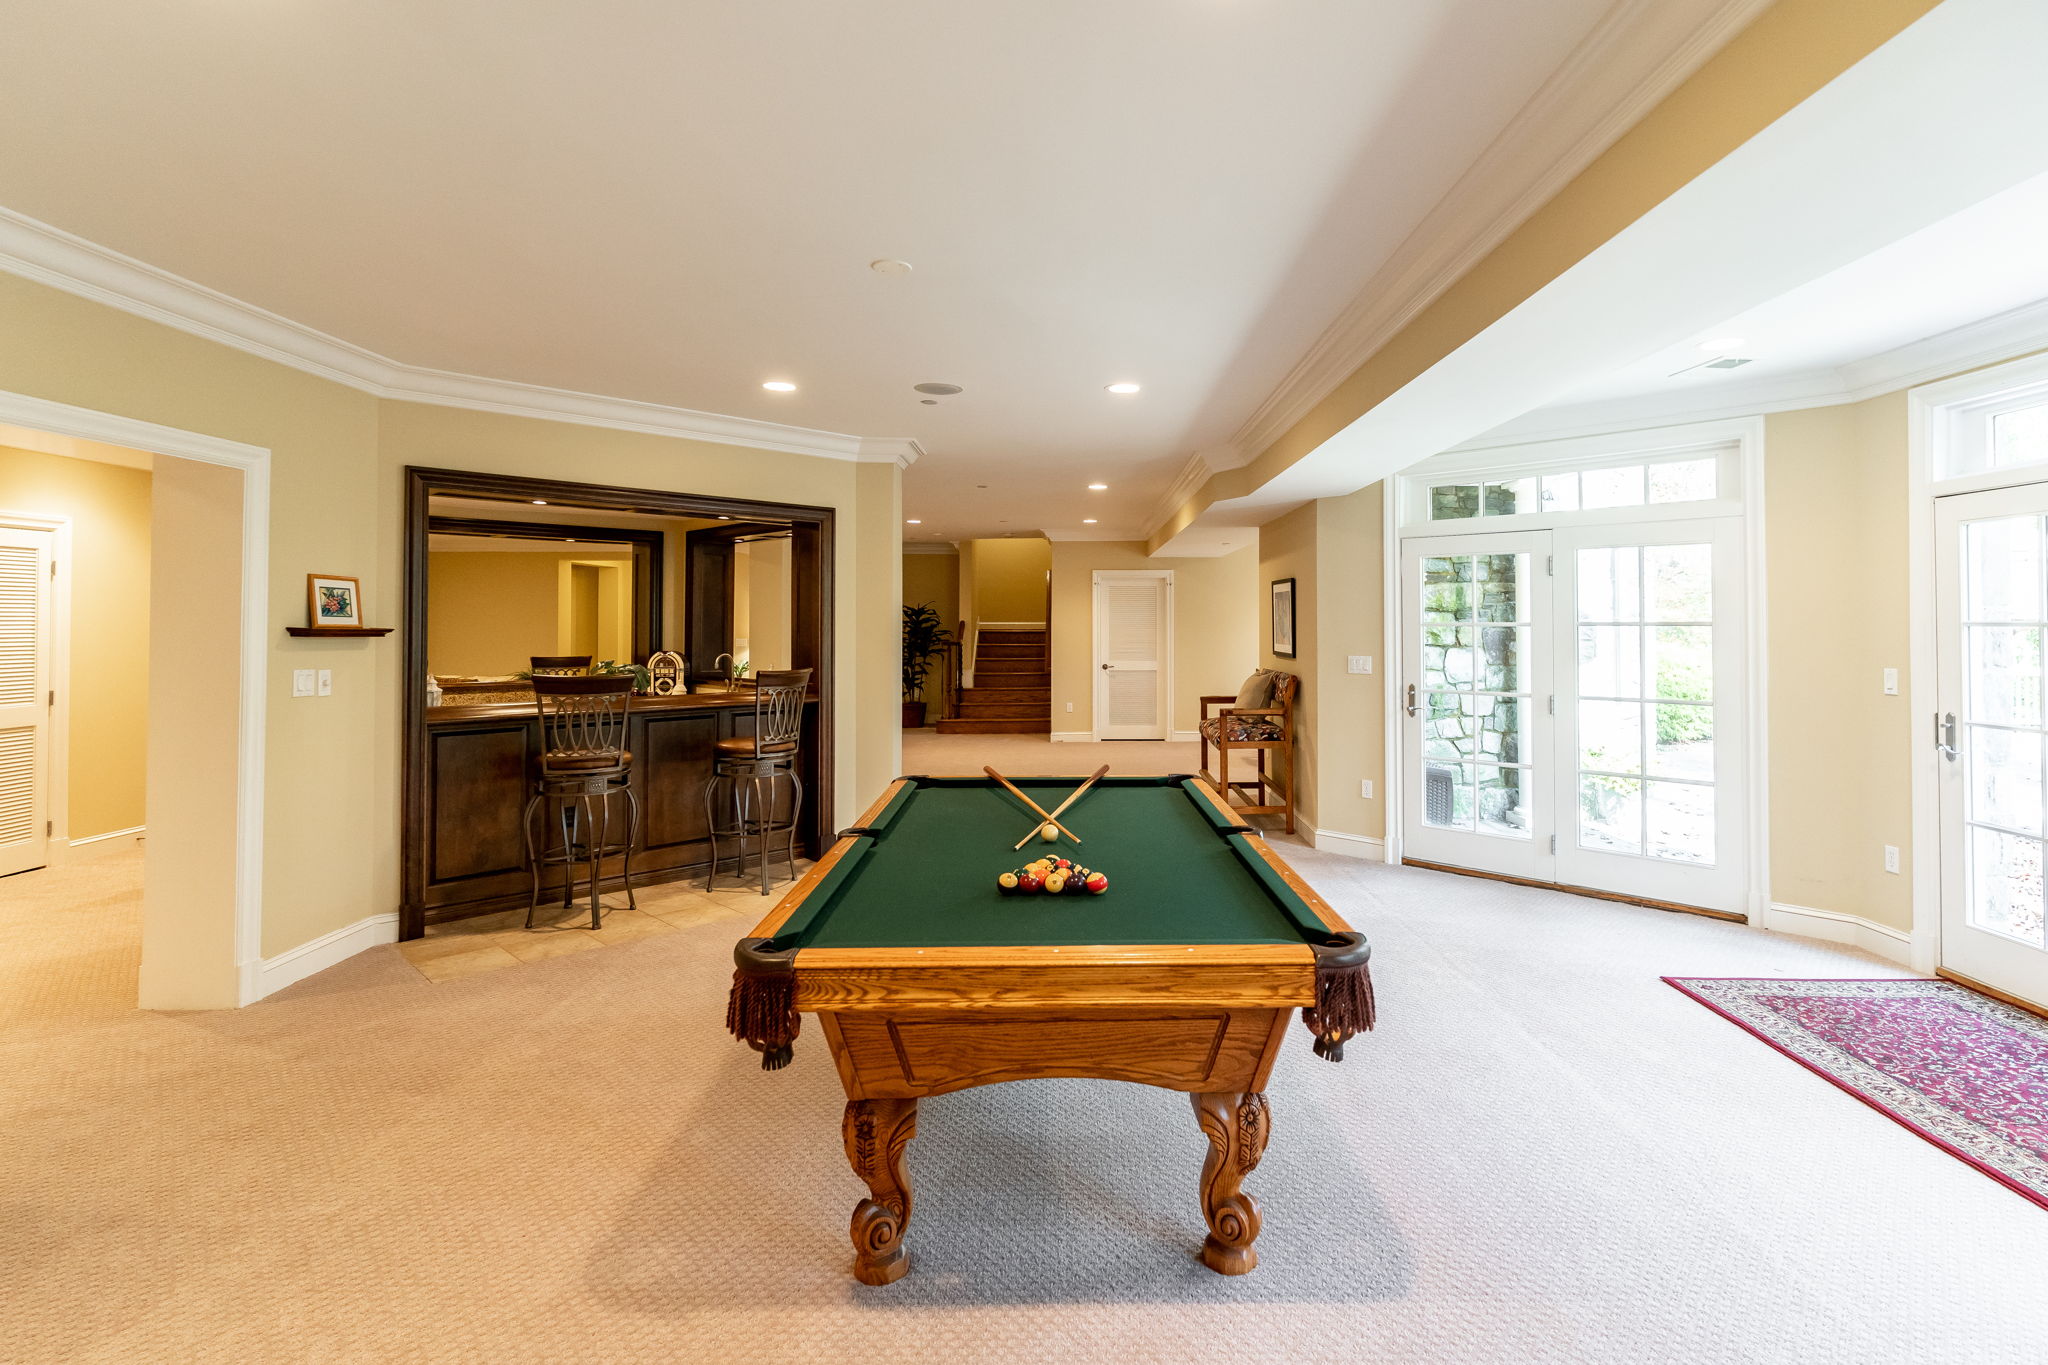 LL with Billiards, Fully Equipped Bar, Cafe, Gym, Game Rm & Storage